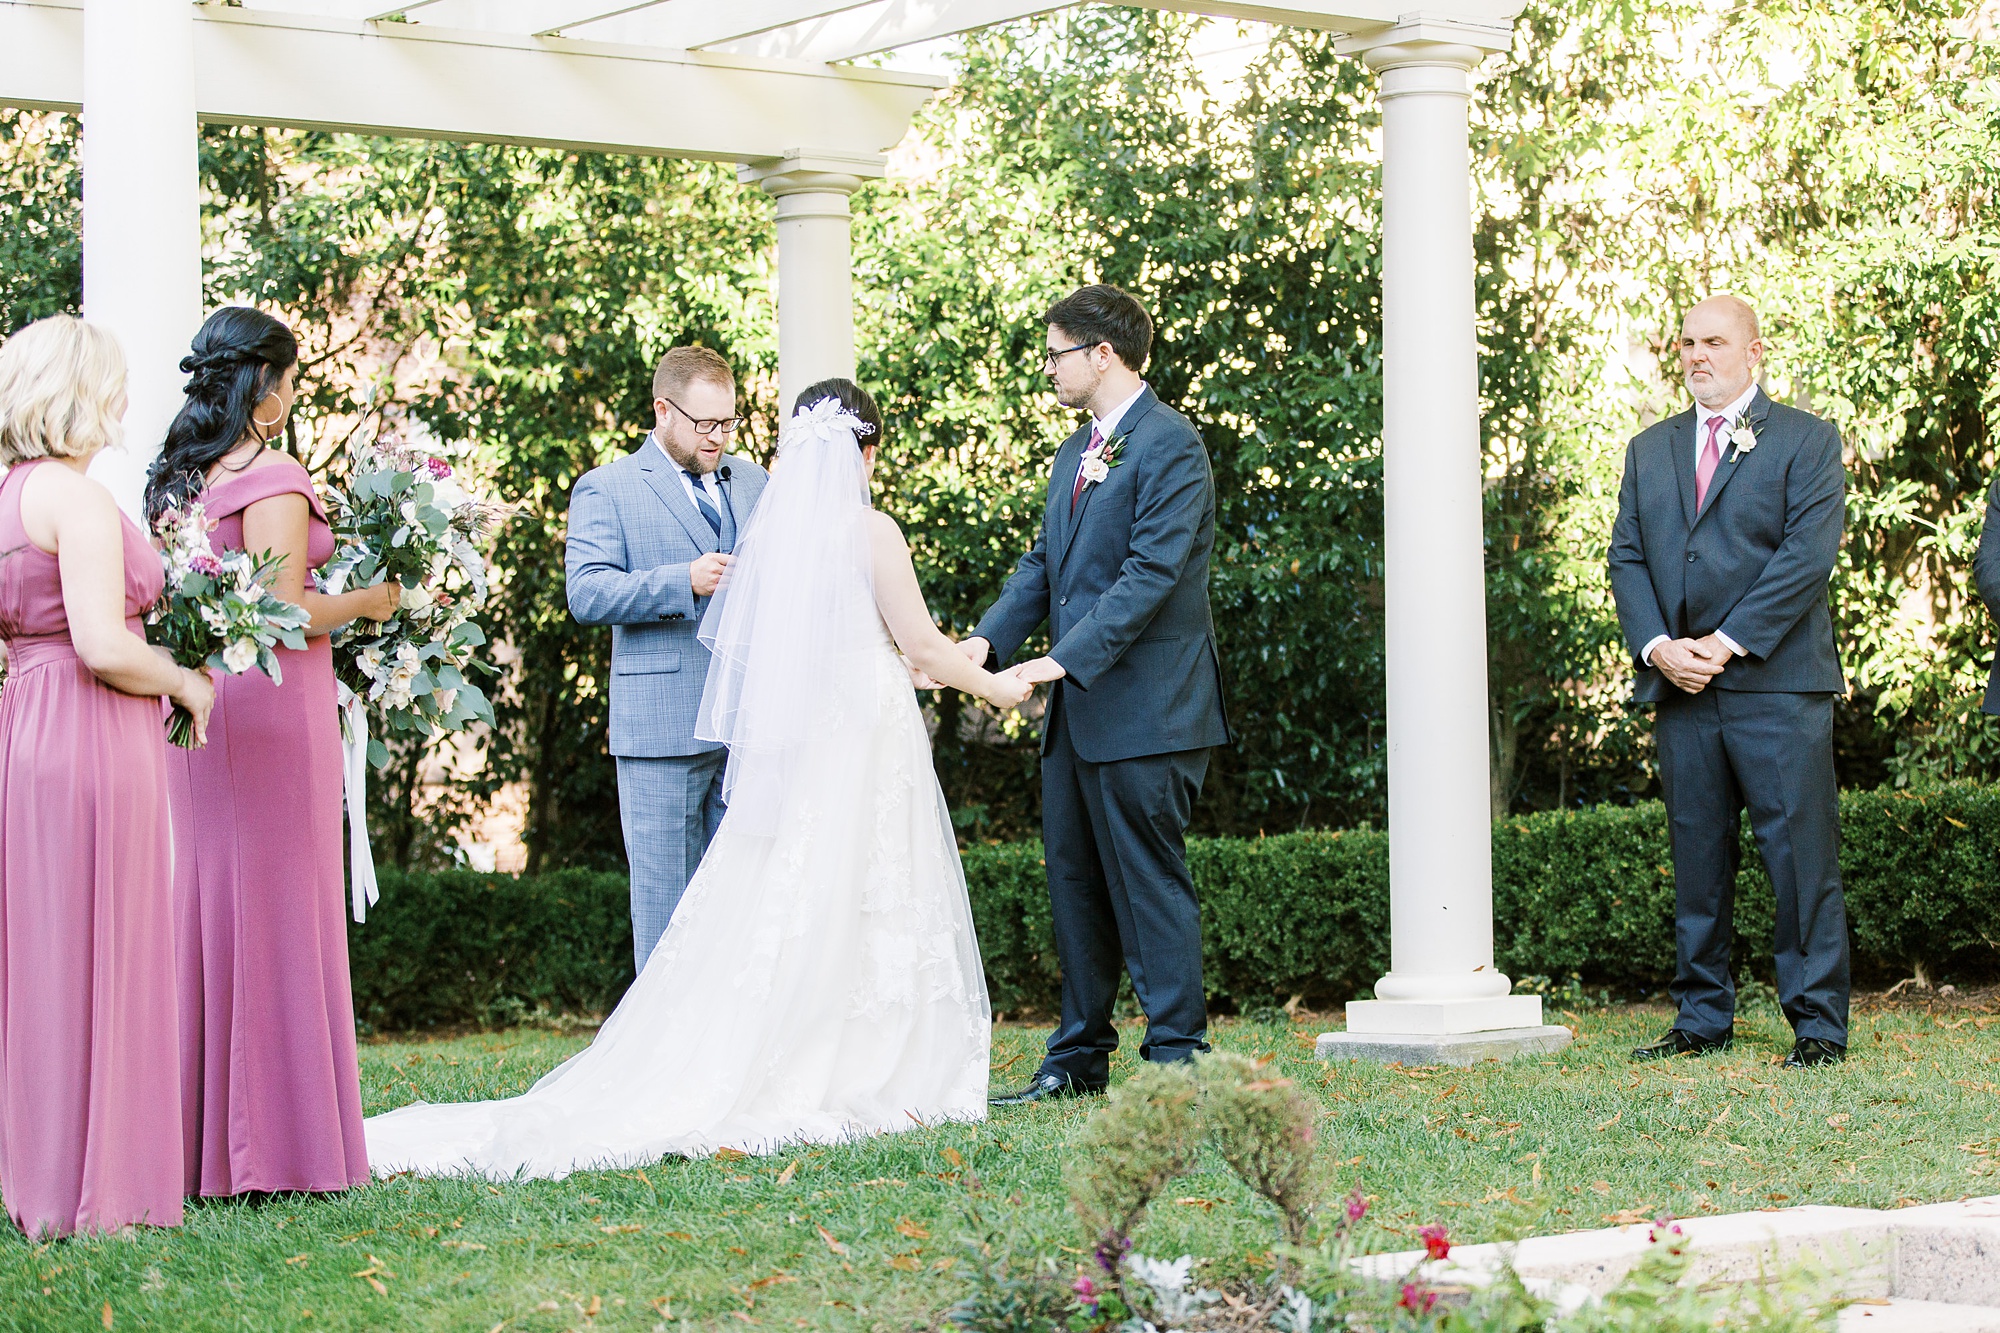 newlyweds exchange vows during outdoor garden ceremony at Separk Mansion